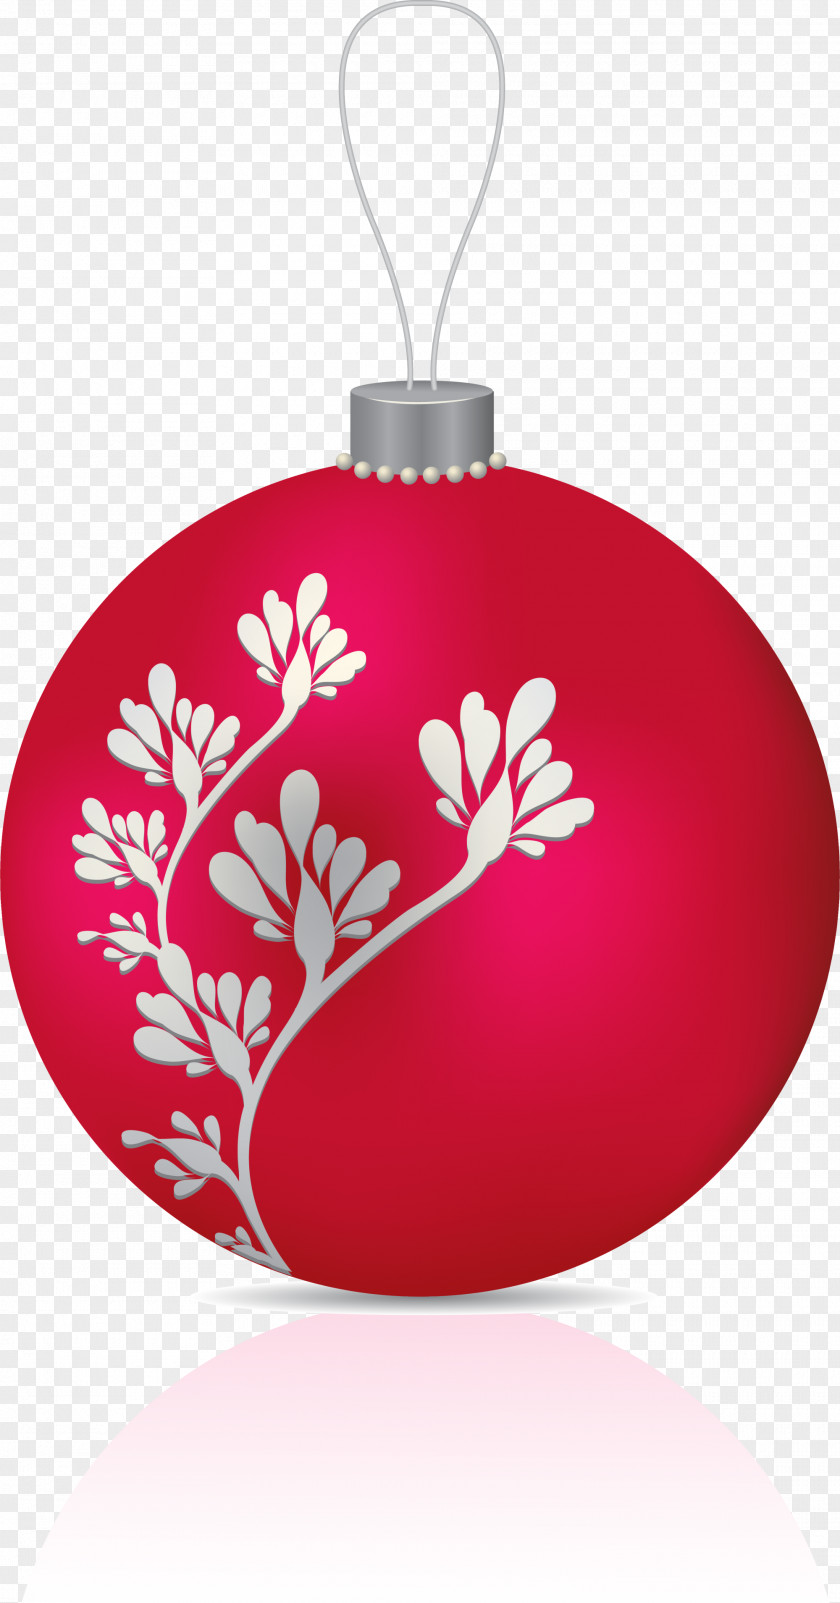 The Red Ball Branches Christmas Ornament Icon PNG